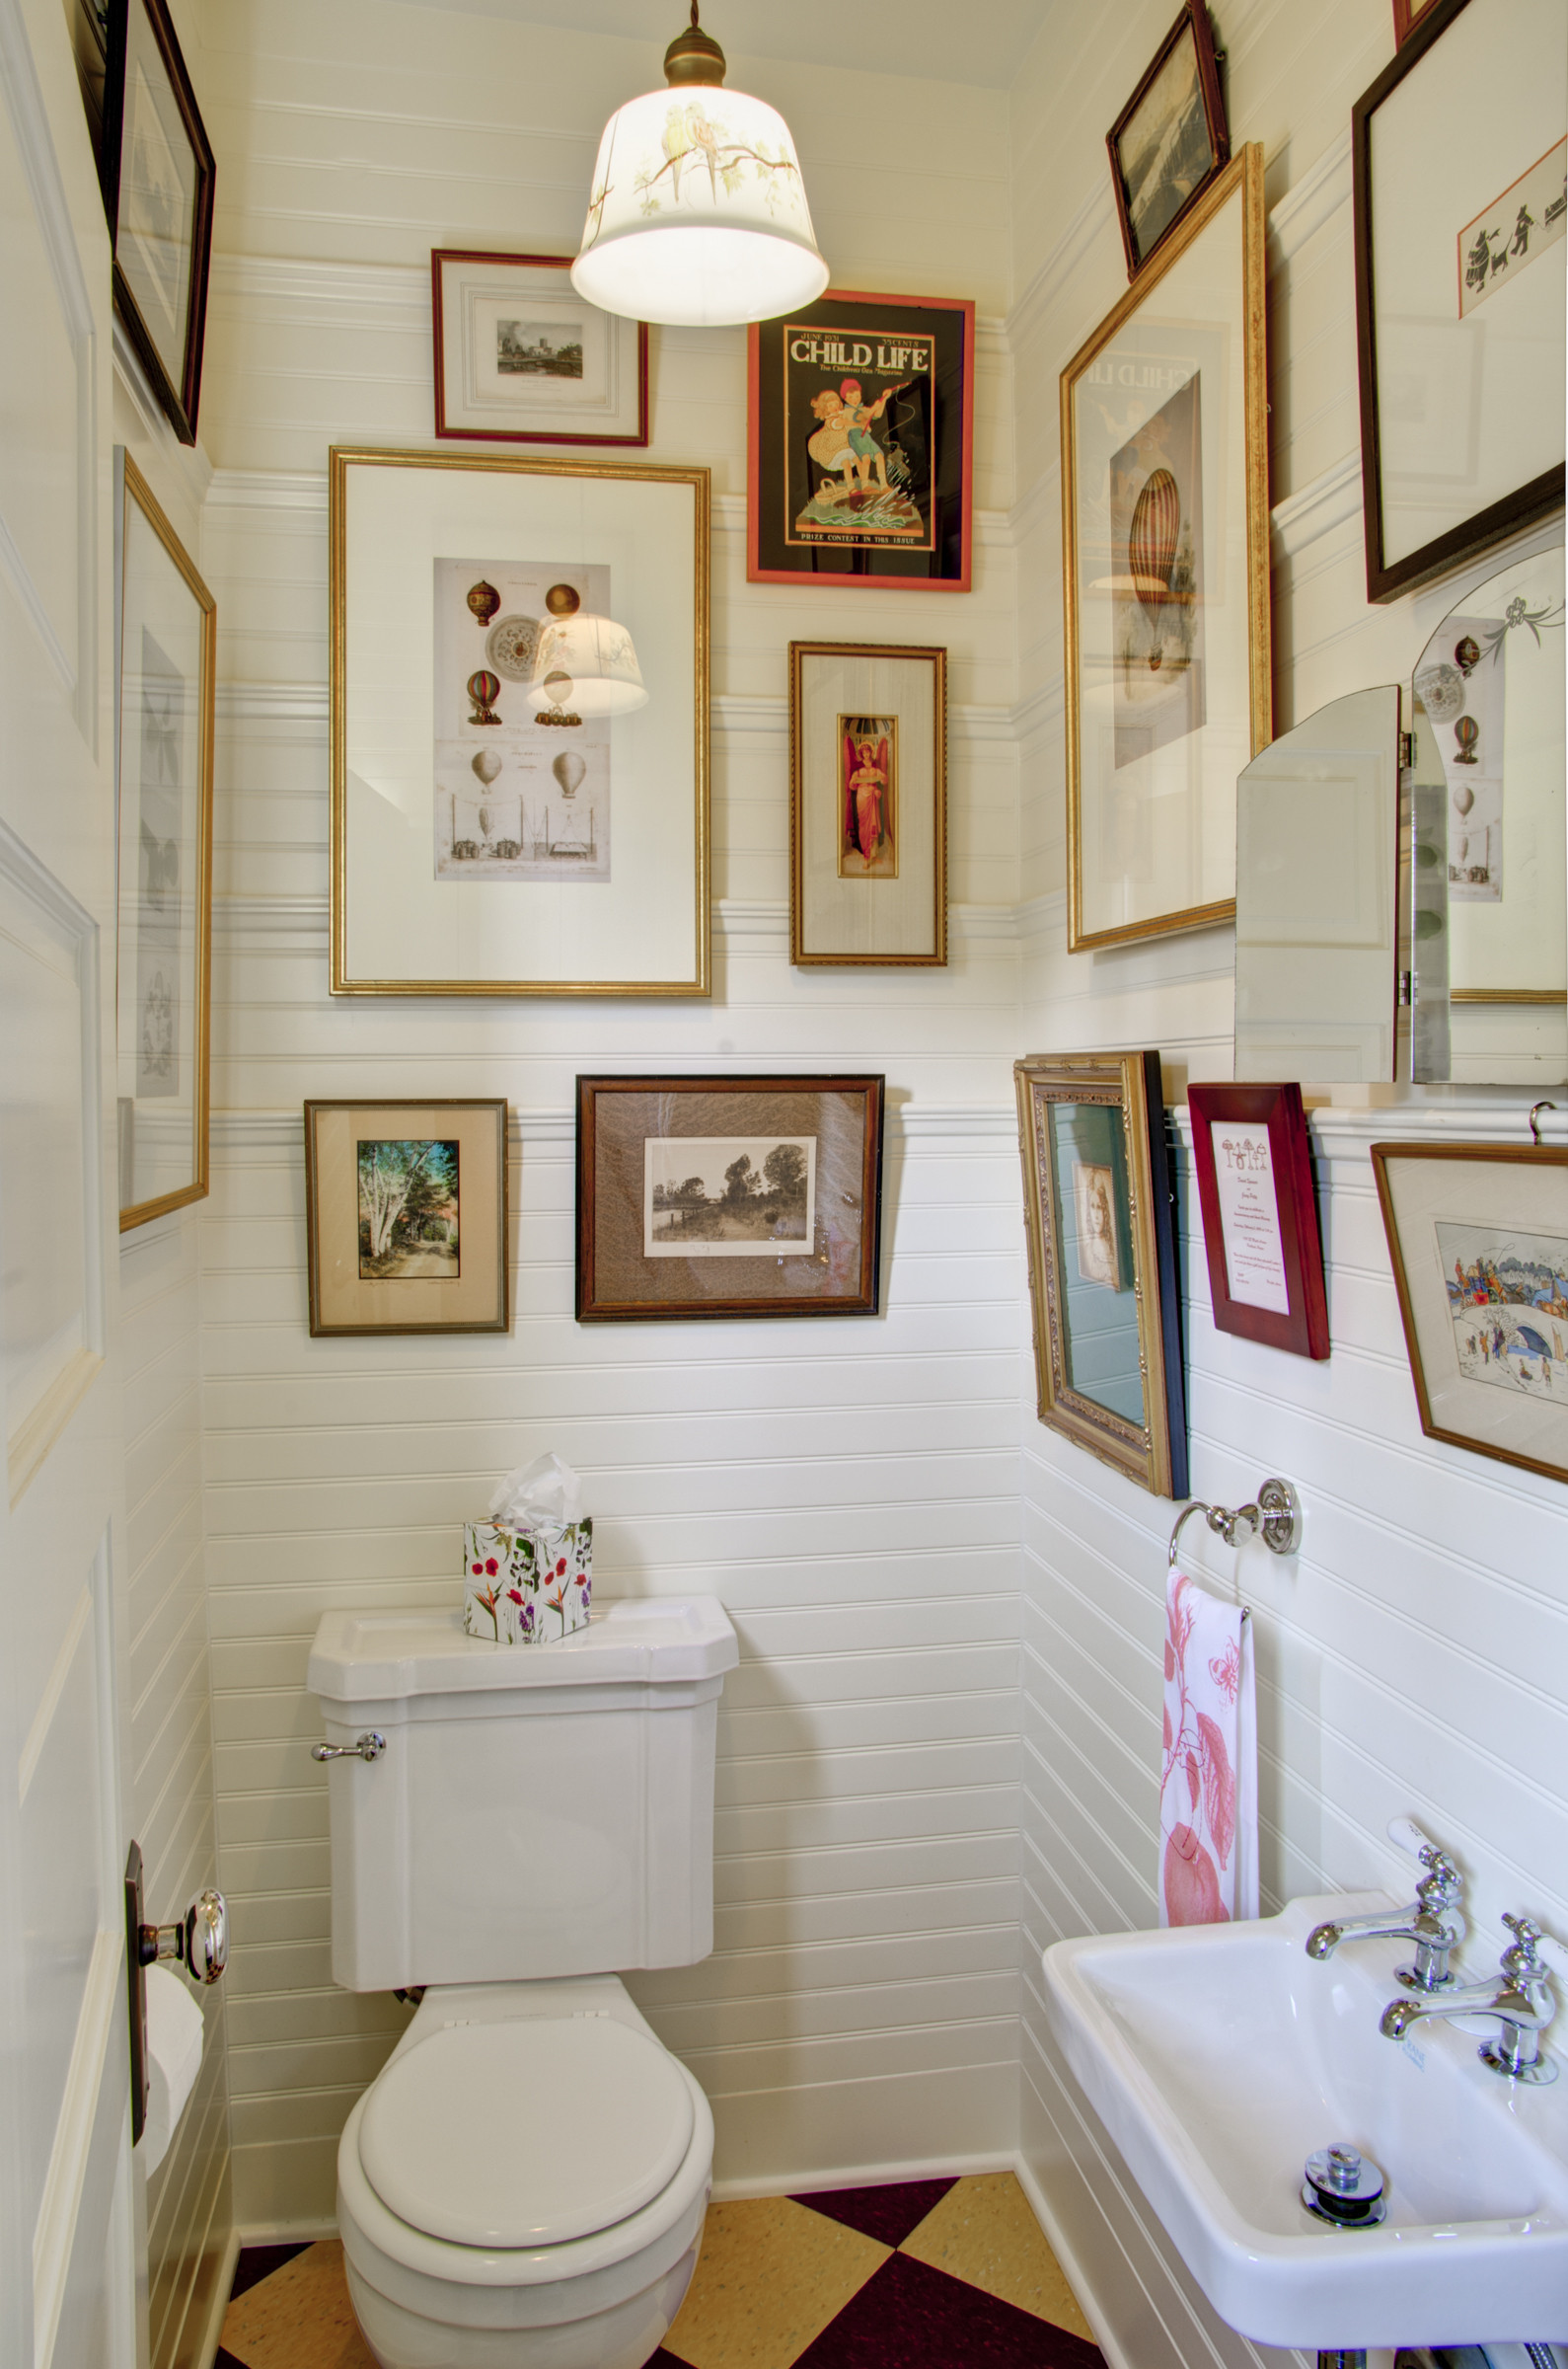 Bathroom Wall Decorating Ideas
 Wall Decorating Ideas from Portland Seattle Home Builder